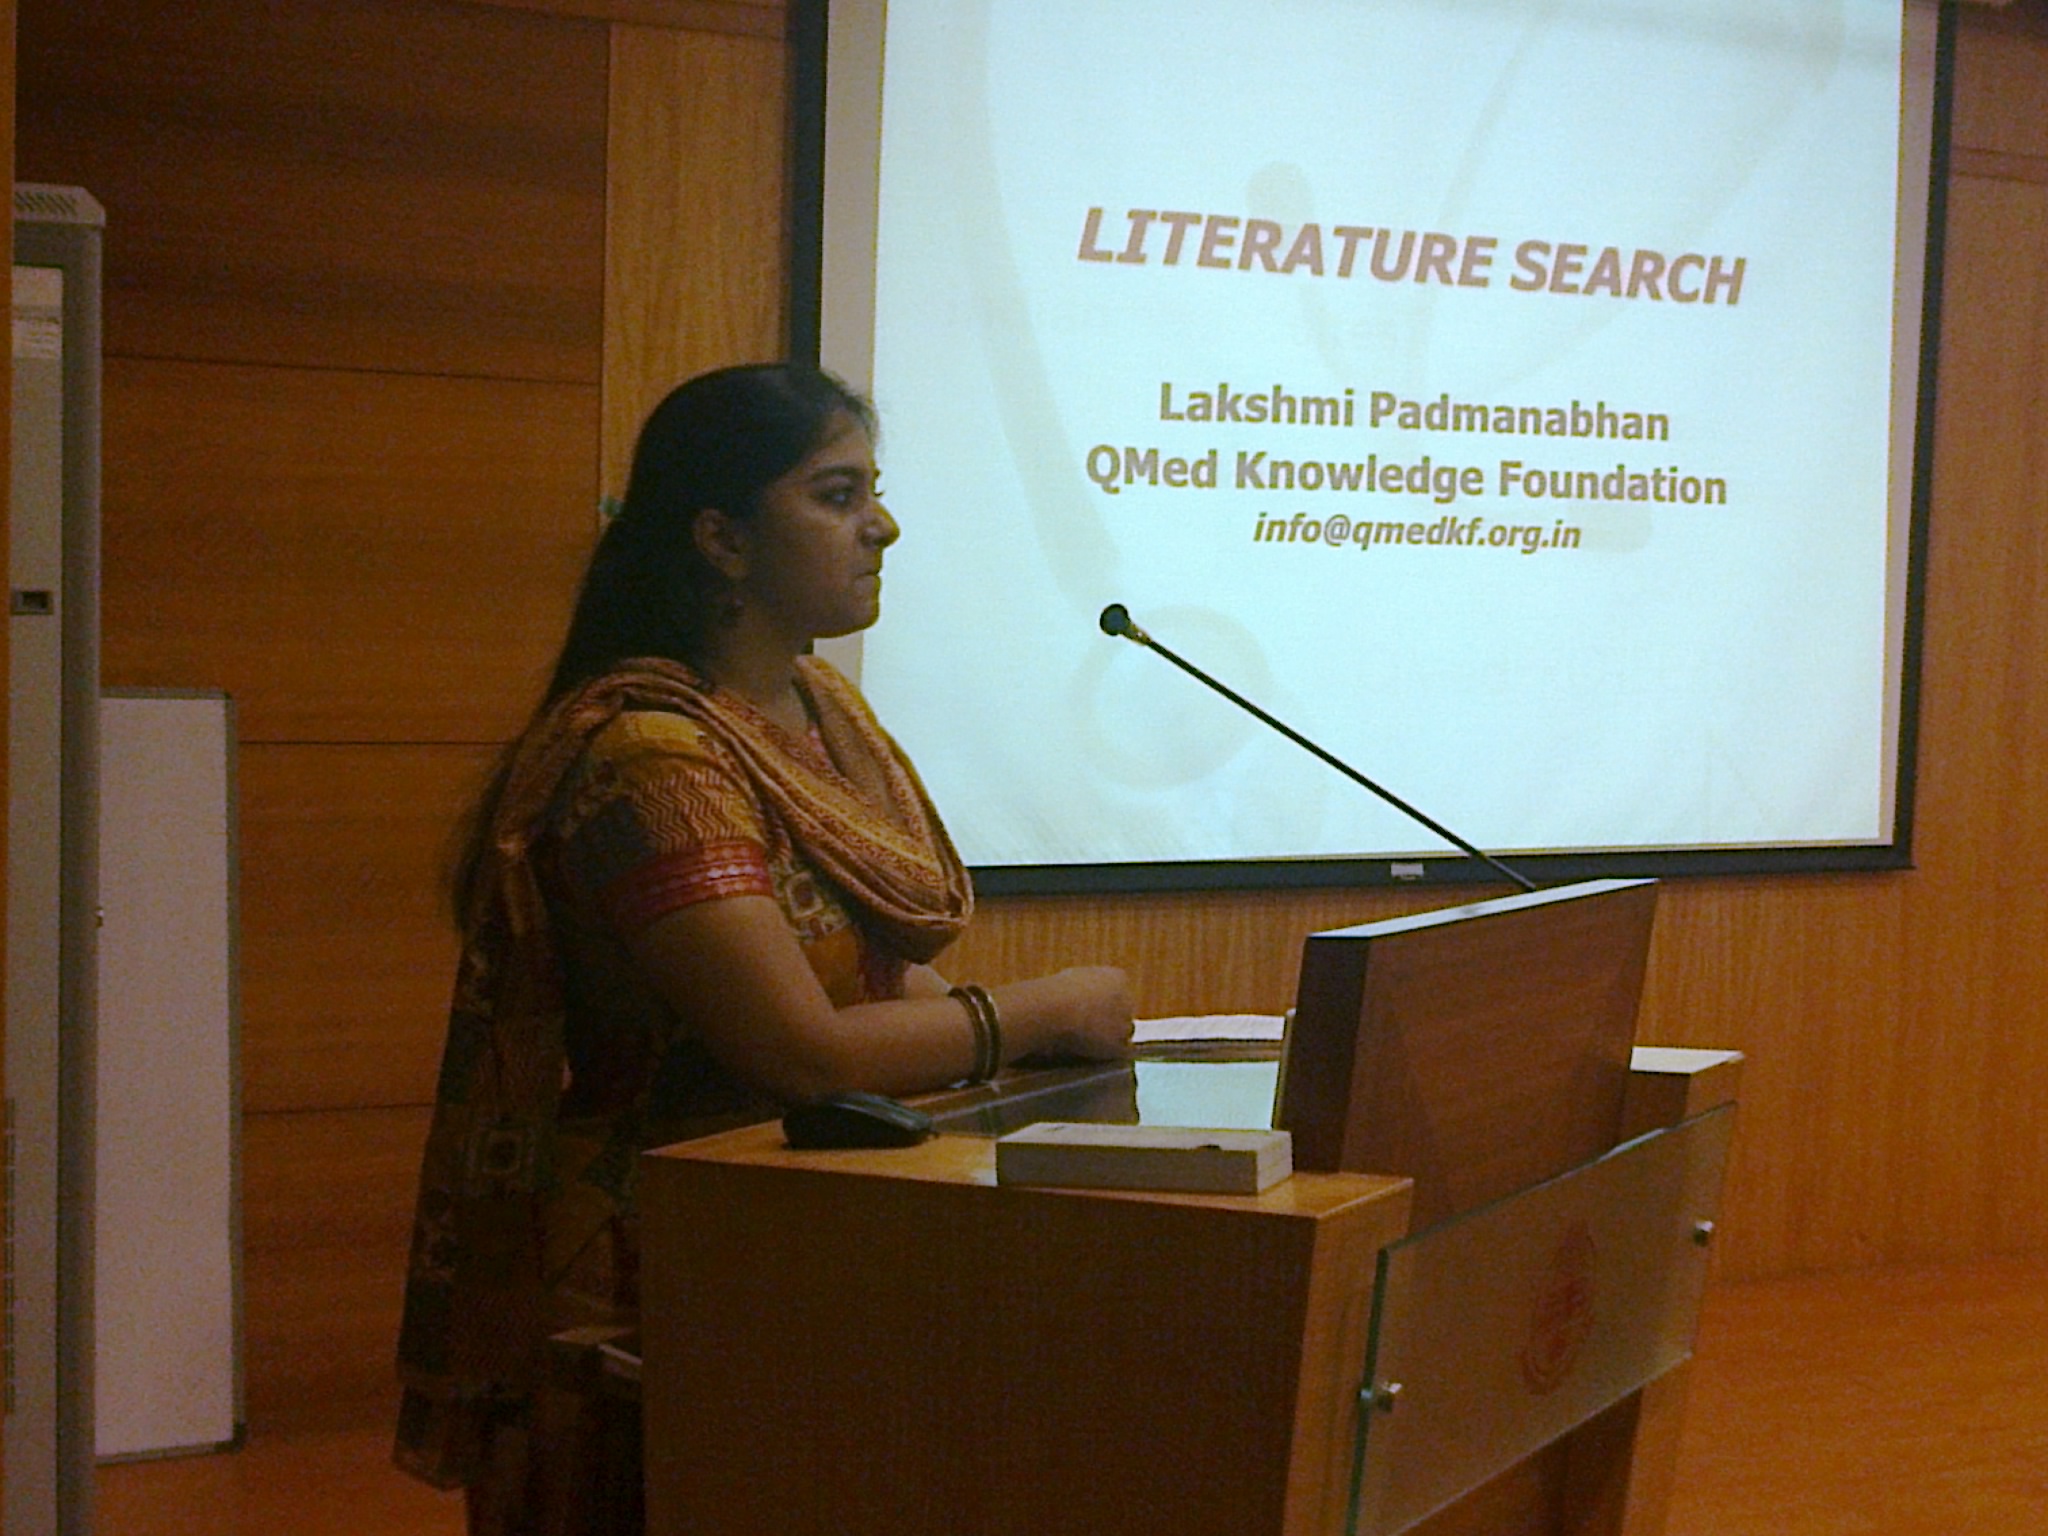 Lecture at the Research Methodology Workshop by JCOR, Mumbai: May 10, 2013